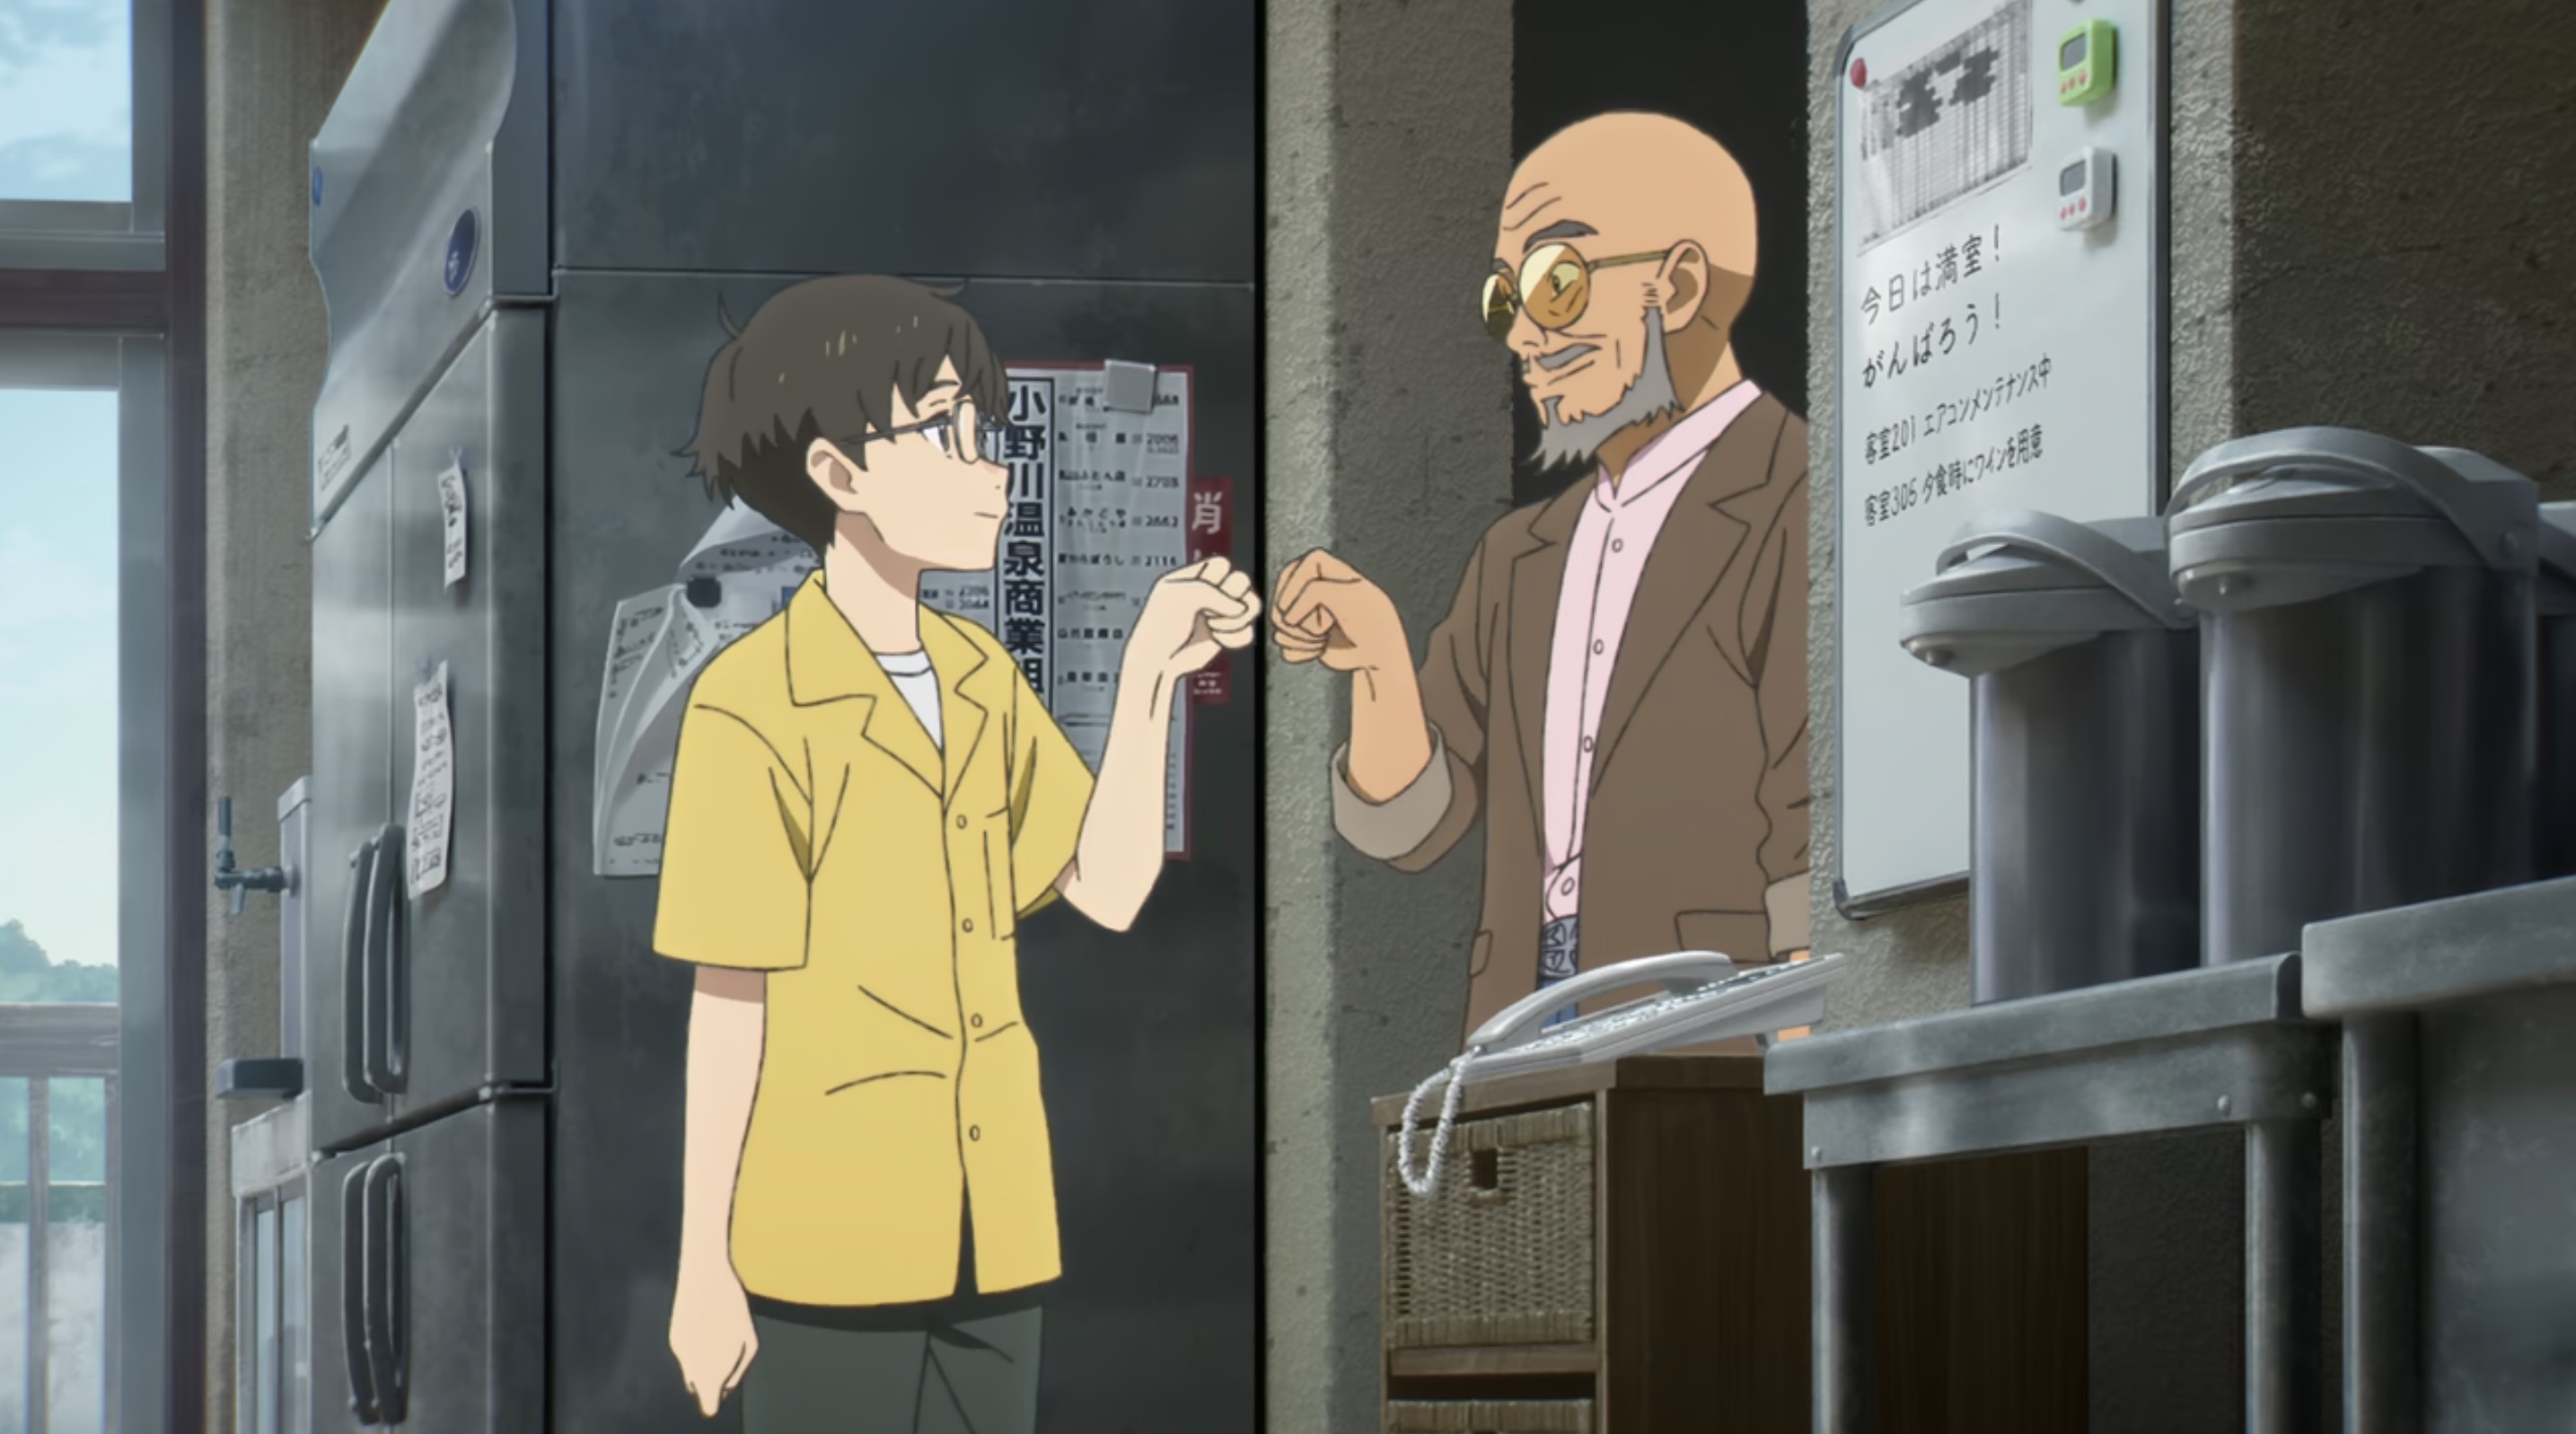 Hiirage (a teenage boy in glasses and a yellow button-down shirt) and Naoya (an older, bald man in glasses, a pink shirt, and a brown cardigan) fist-bump in a kitchen in a scene from Netflix’s anime movie My Oni Girl